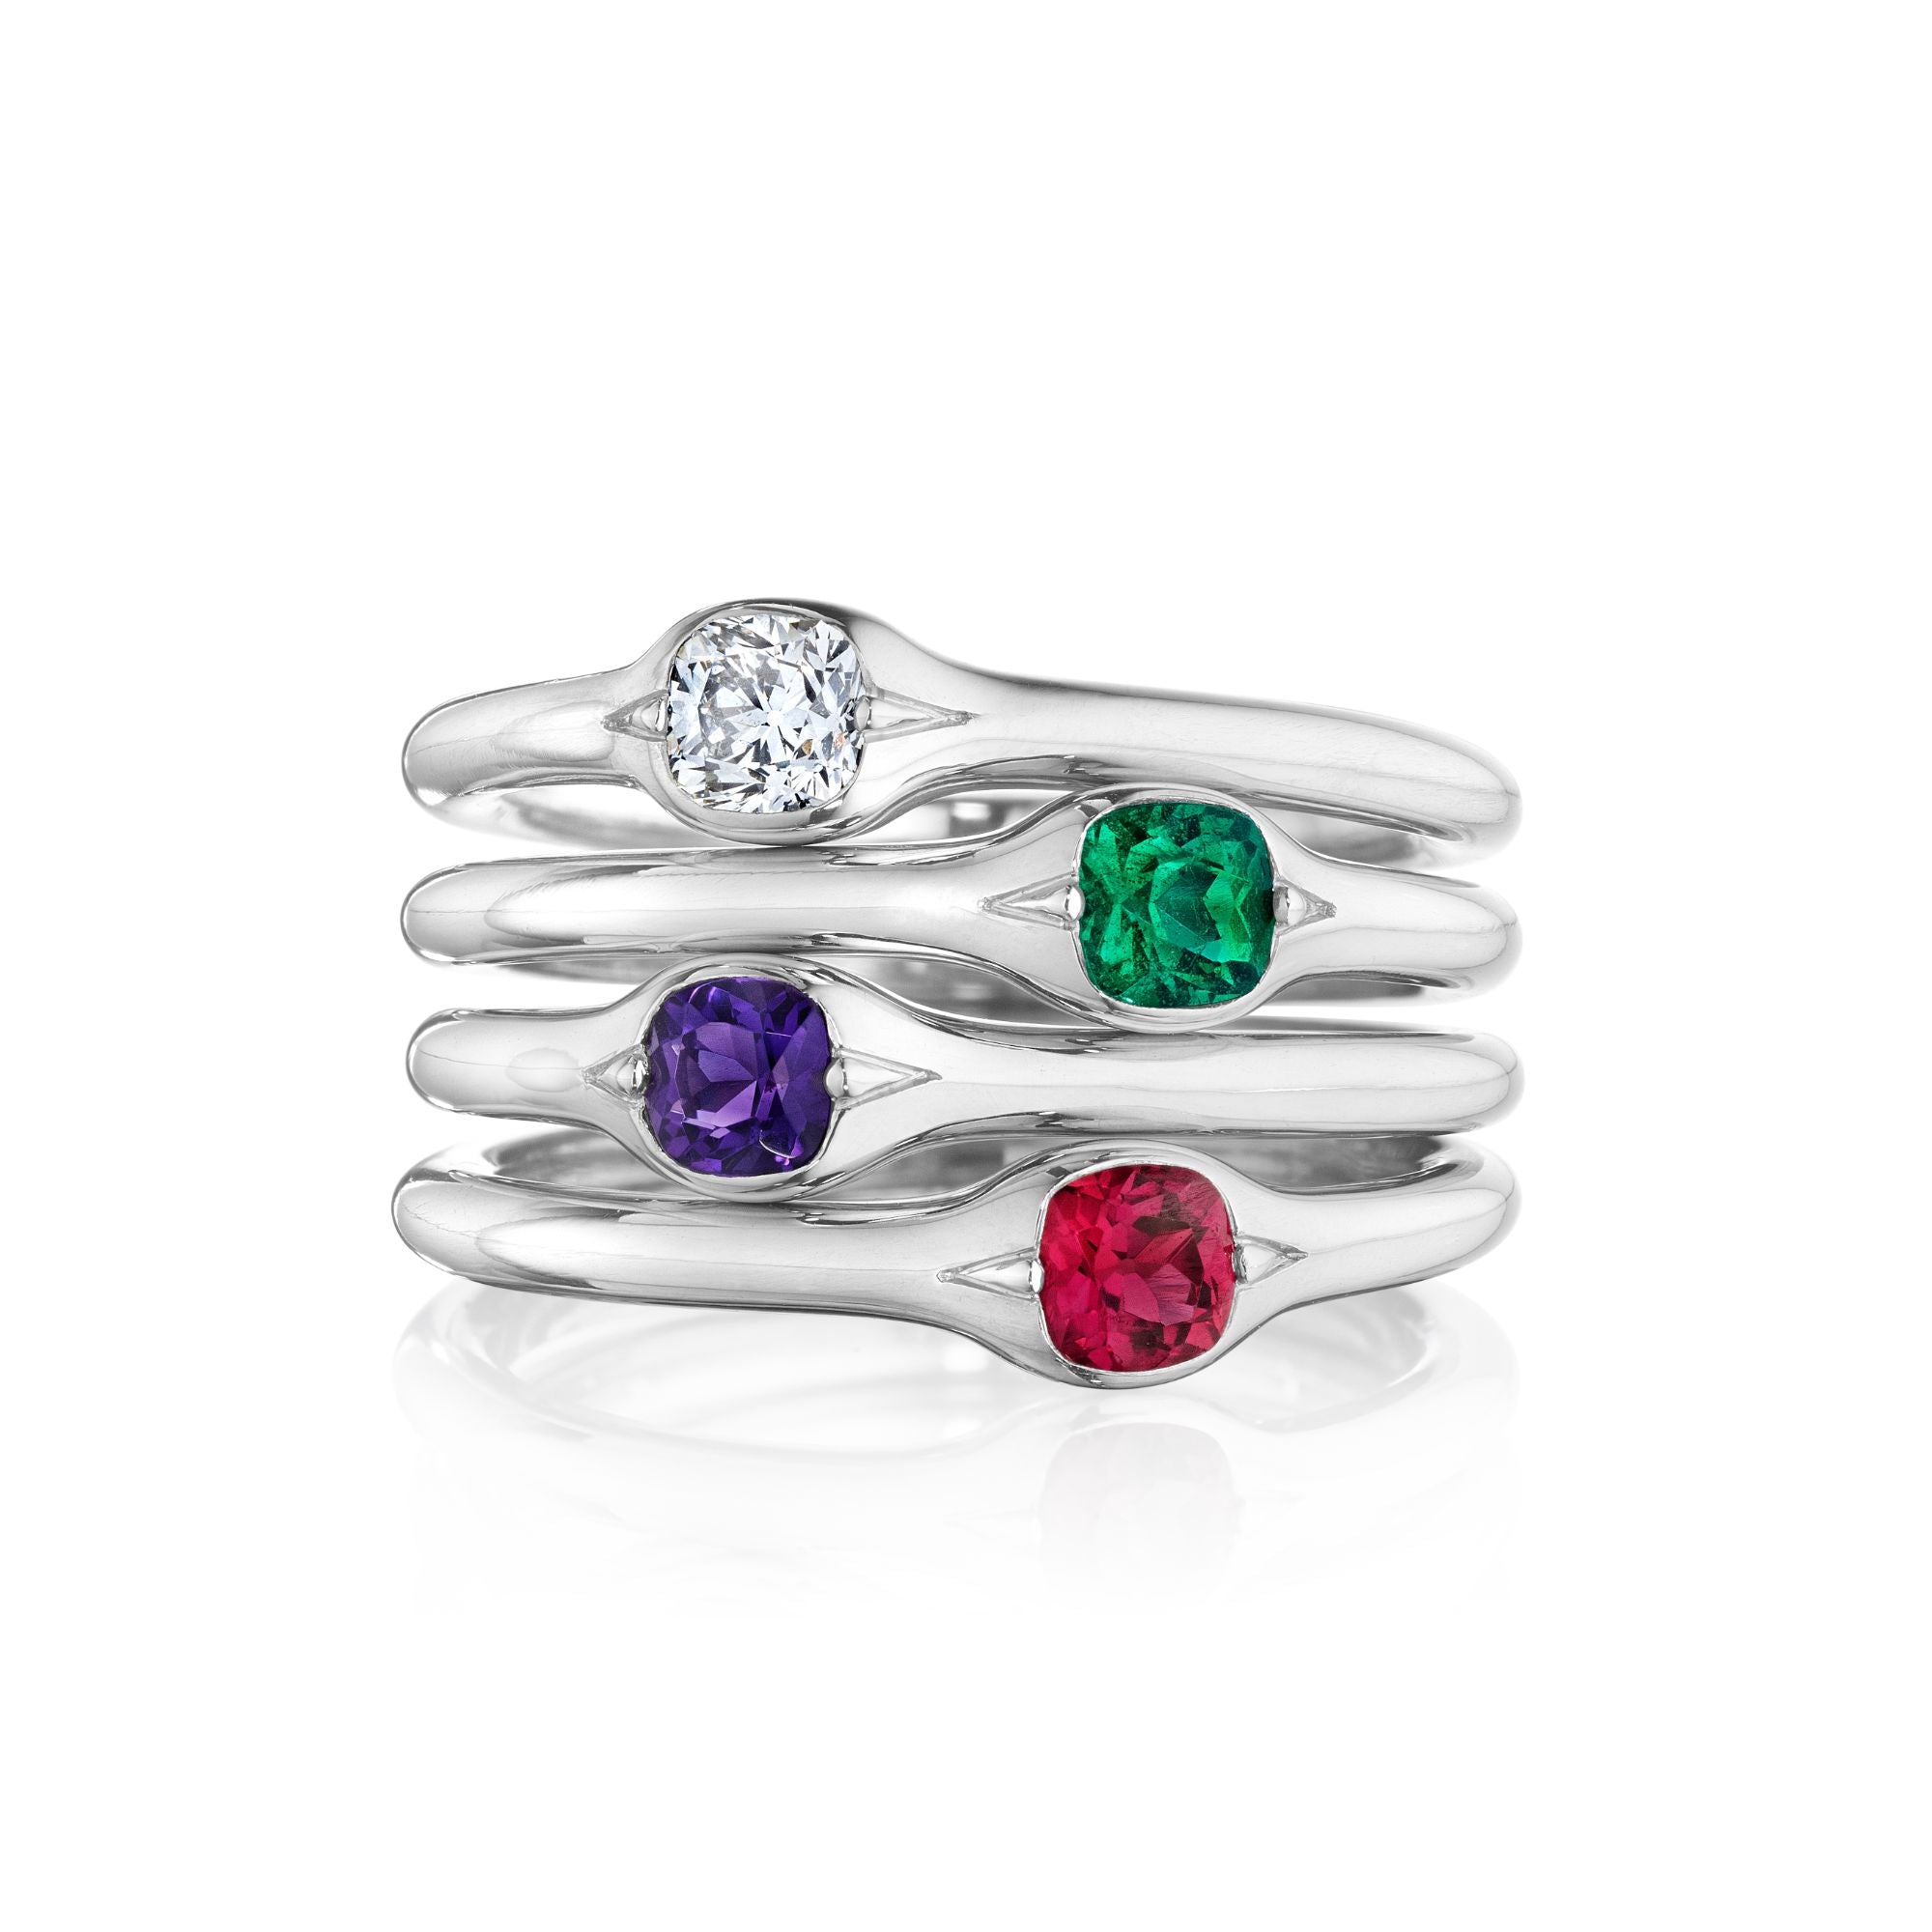 SET OF FOUR GEMSTONE “DEAR” ACROSTIC STACKING RINGS BY SIEGELSON, NEW YORK